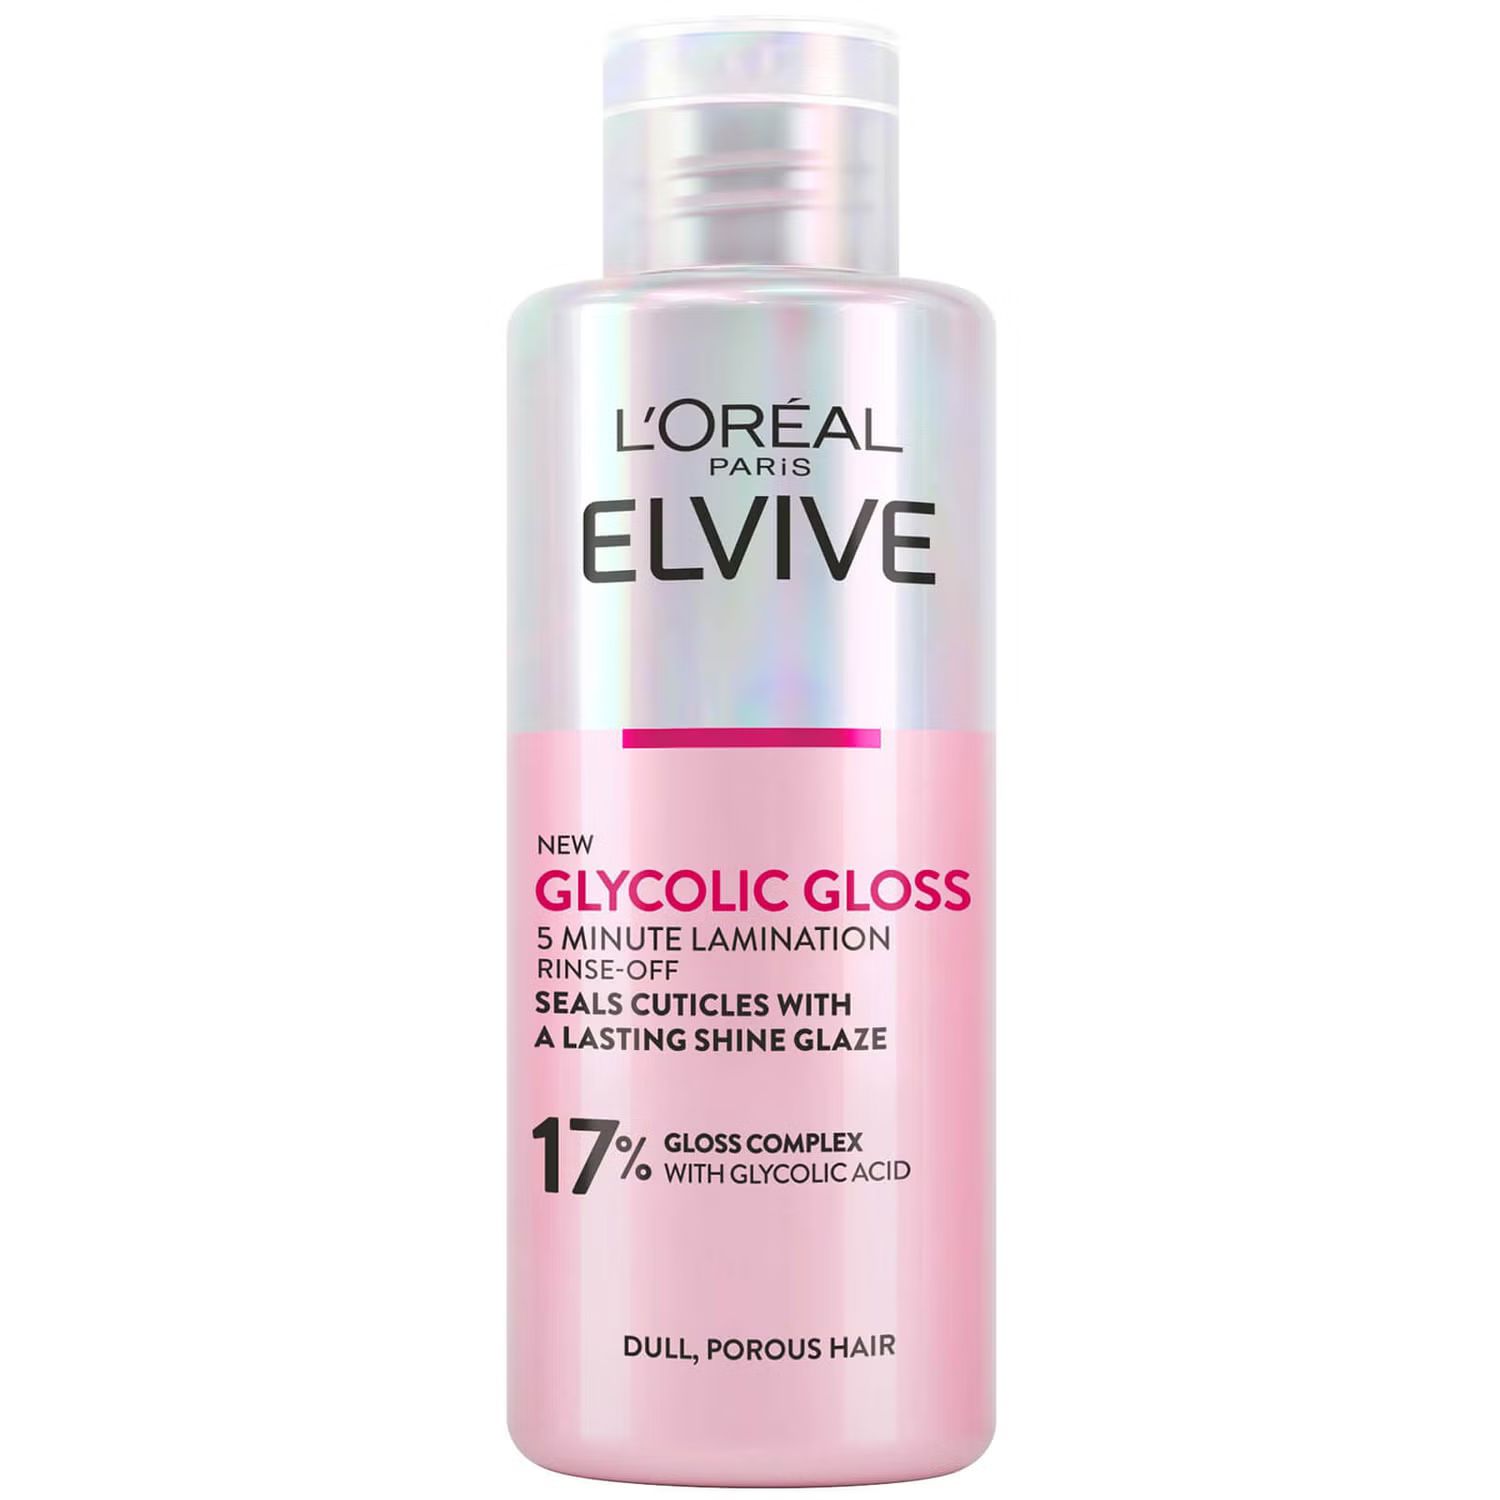 L'Oréal Paris Elvive Glycolic Gloss Rinse-Off 5 minute Lamination Treatment for Dull Hair 150ml | Look Fantastic (UK)